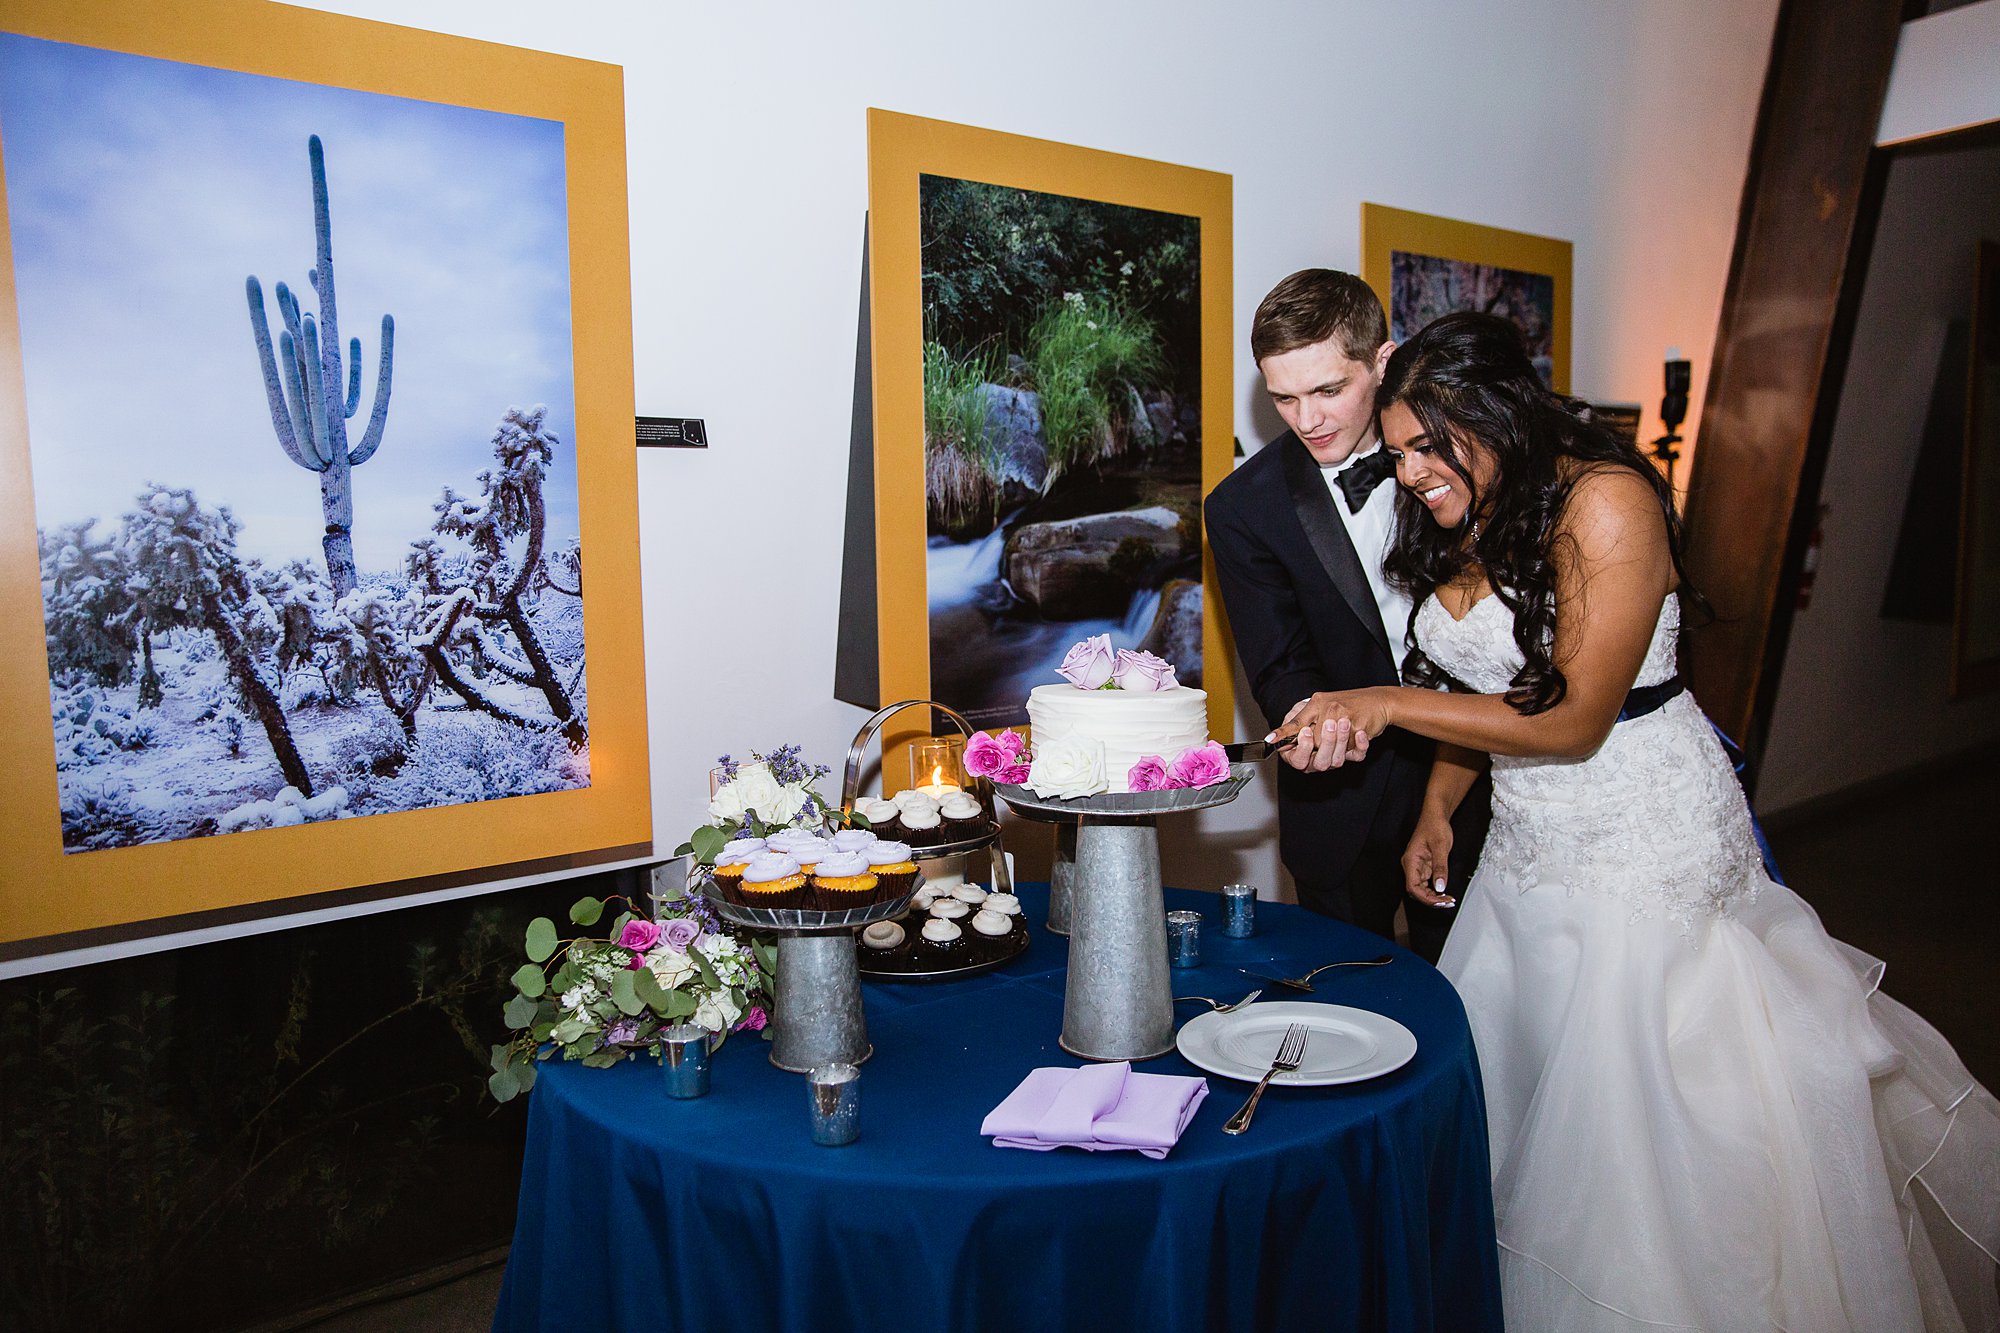 Bride and groom cutting their wedding cake during the reception at the Rio Salado Audubon center by Phoenix wedding photographer PMA Photography.